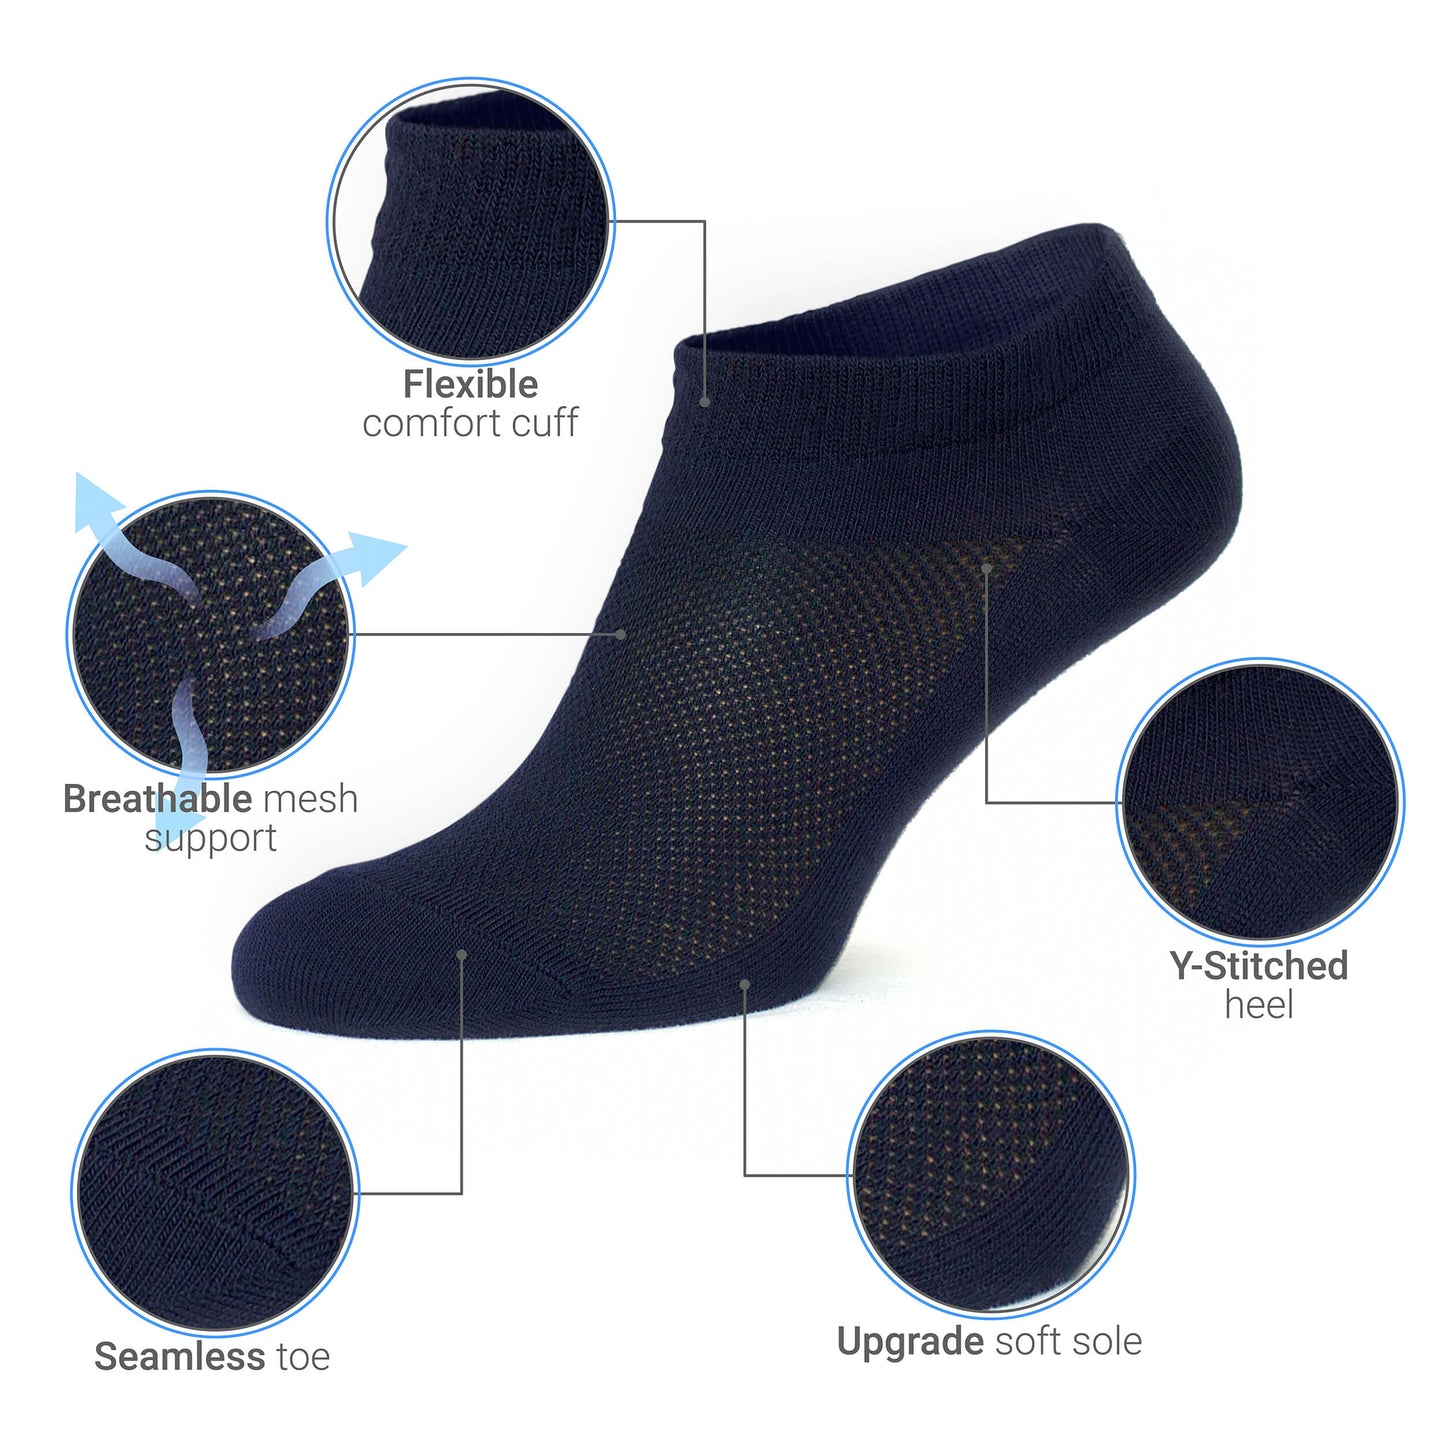 Unisex Ultra Thin Womens Socks Breathable Cotton Ankle Socks, size 7-9, in bag 4 pairs